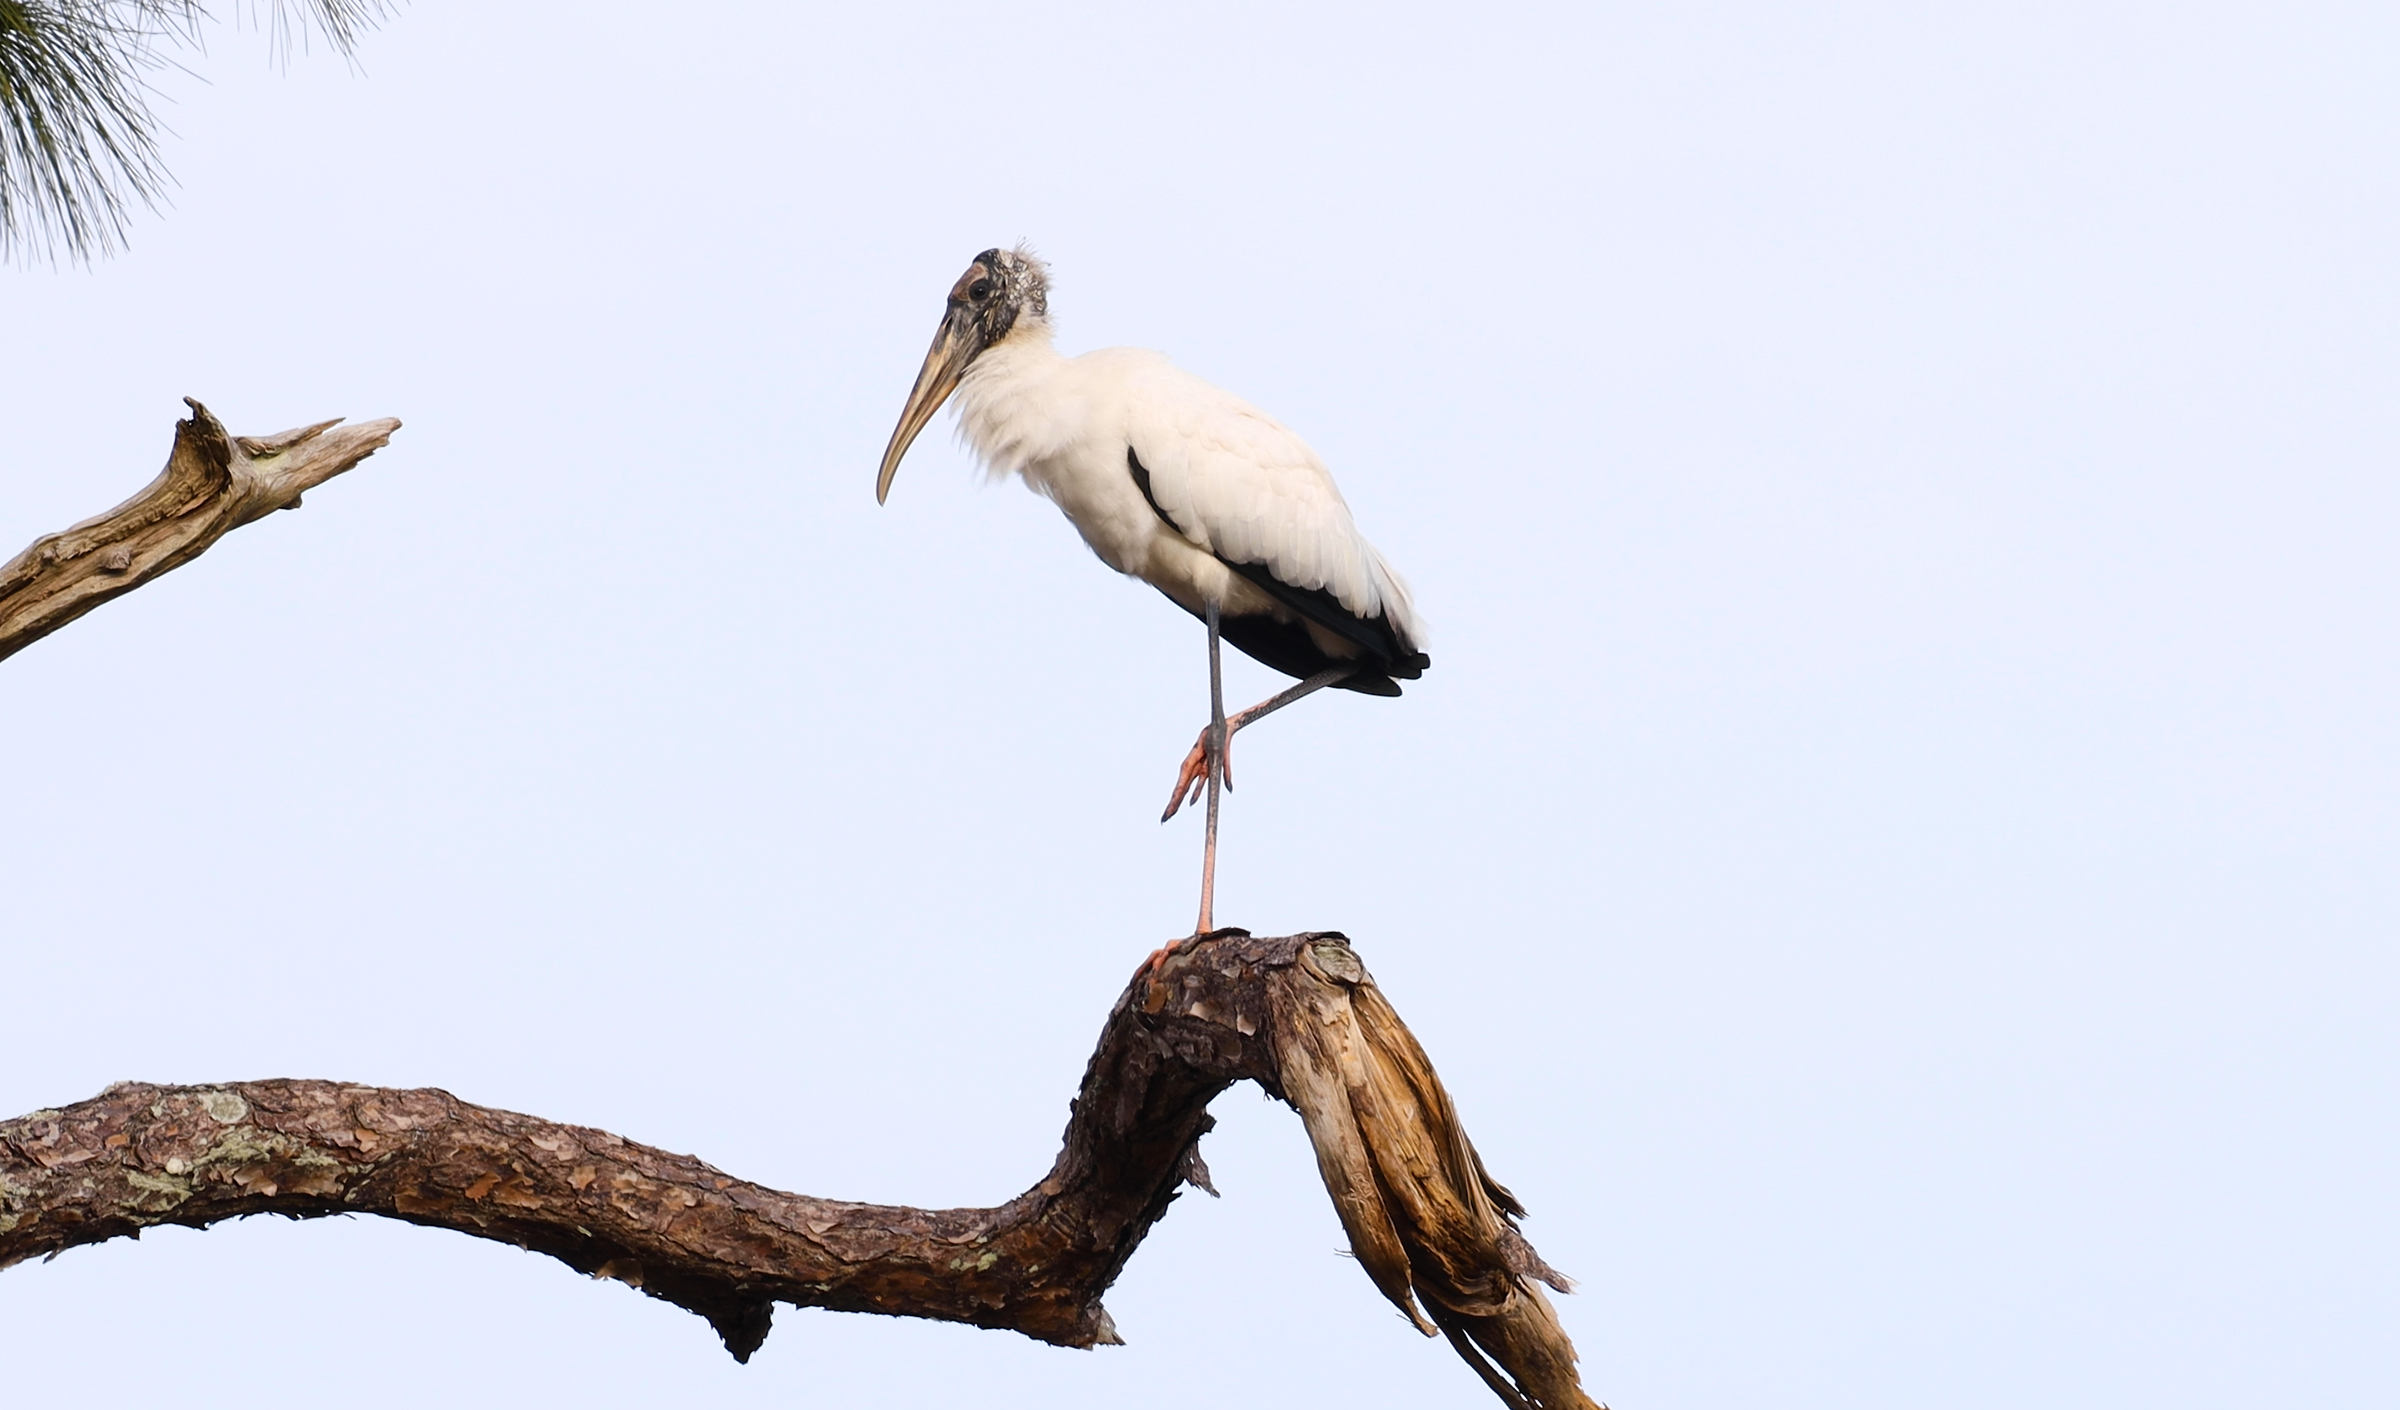 A wading bird in a tree.